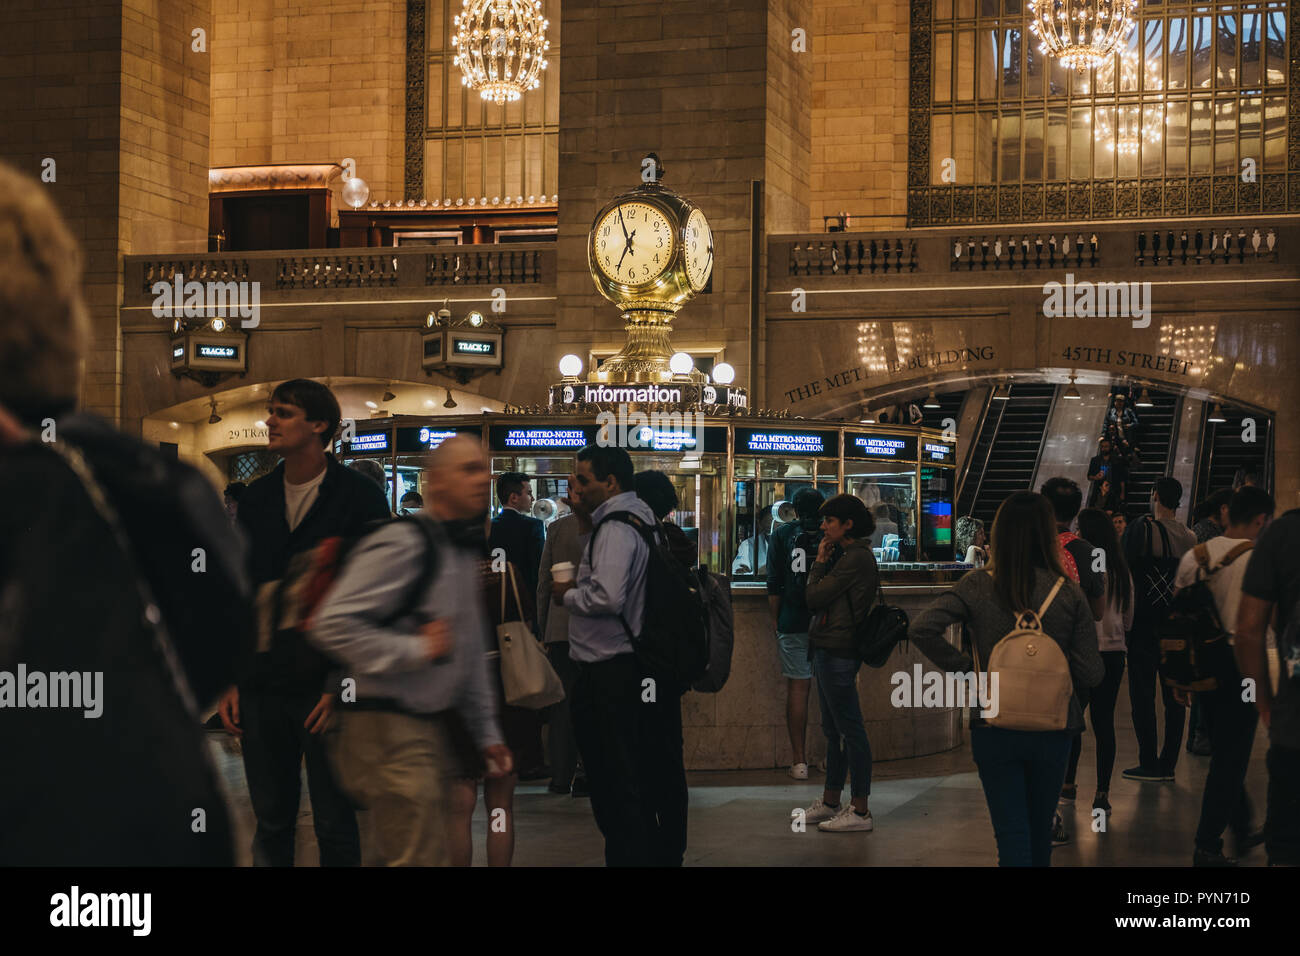 New York, USA - June 1, 2018: People walking inside Grand Central Terminal, a world-famous landmark and transportation hub in Midtown Manhattan, New Y Stock Photo